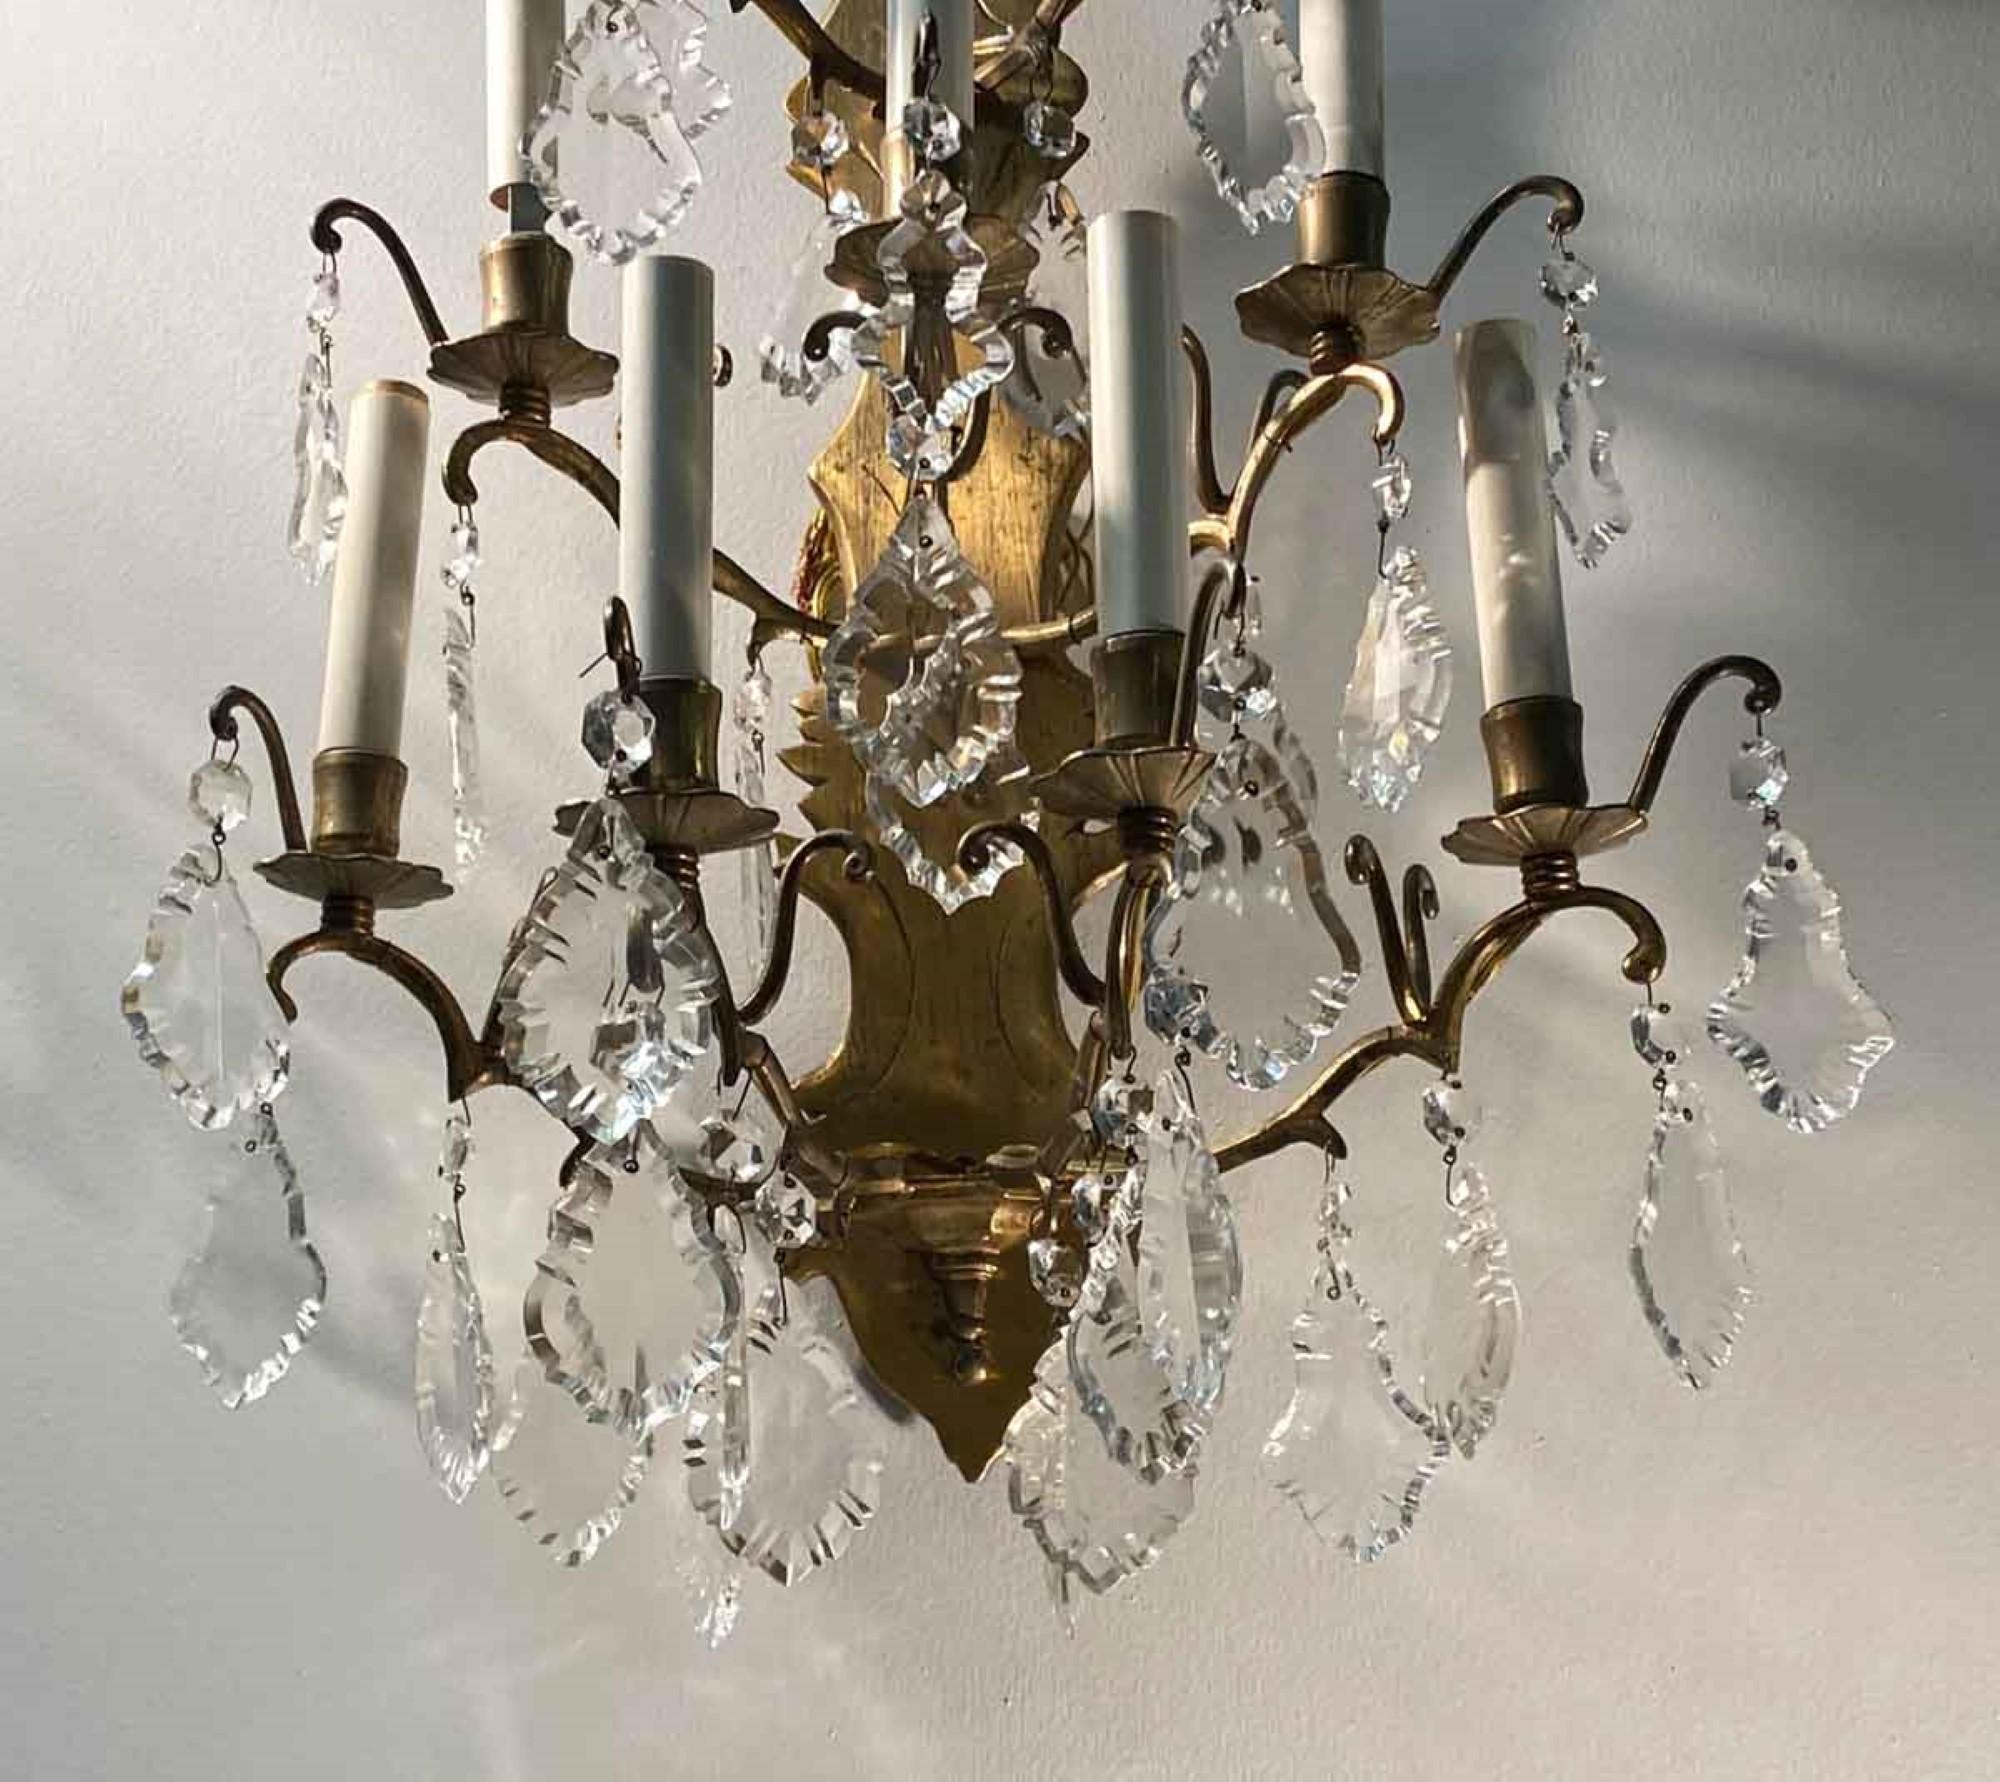 NY Plaza Hotel French Brass Crystal Sconce 9 Arms Quantity Available 1